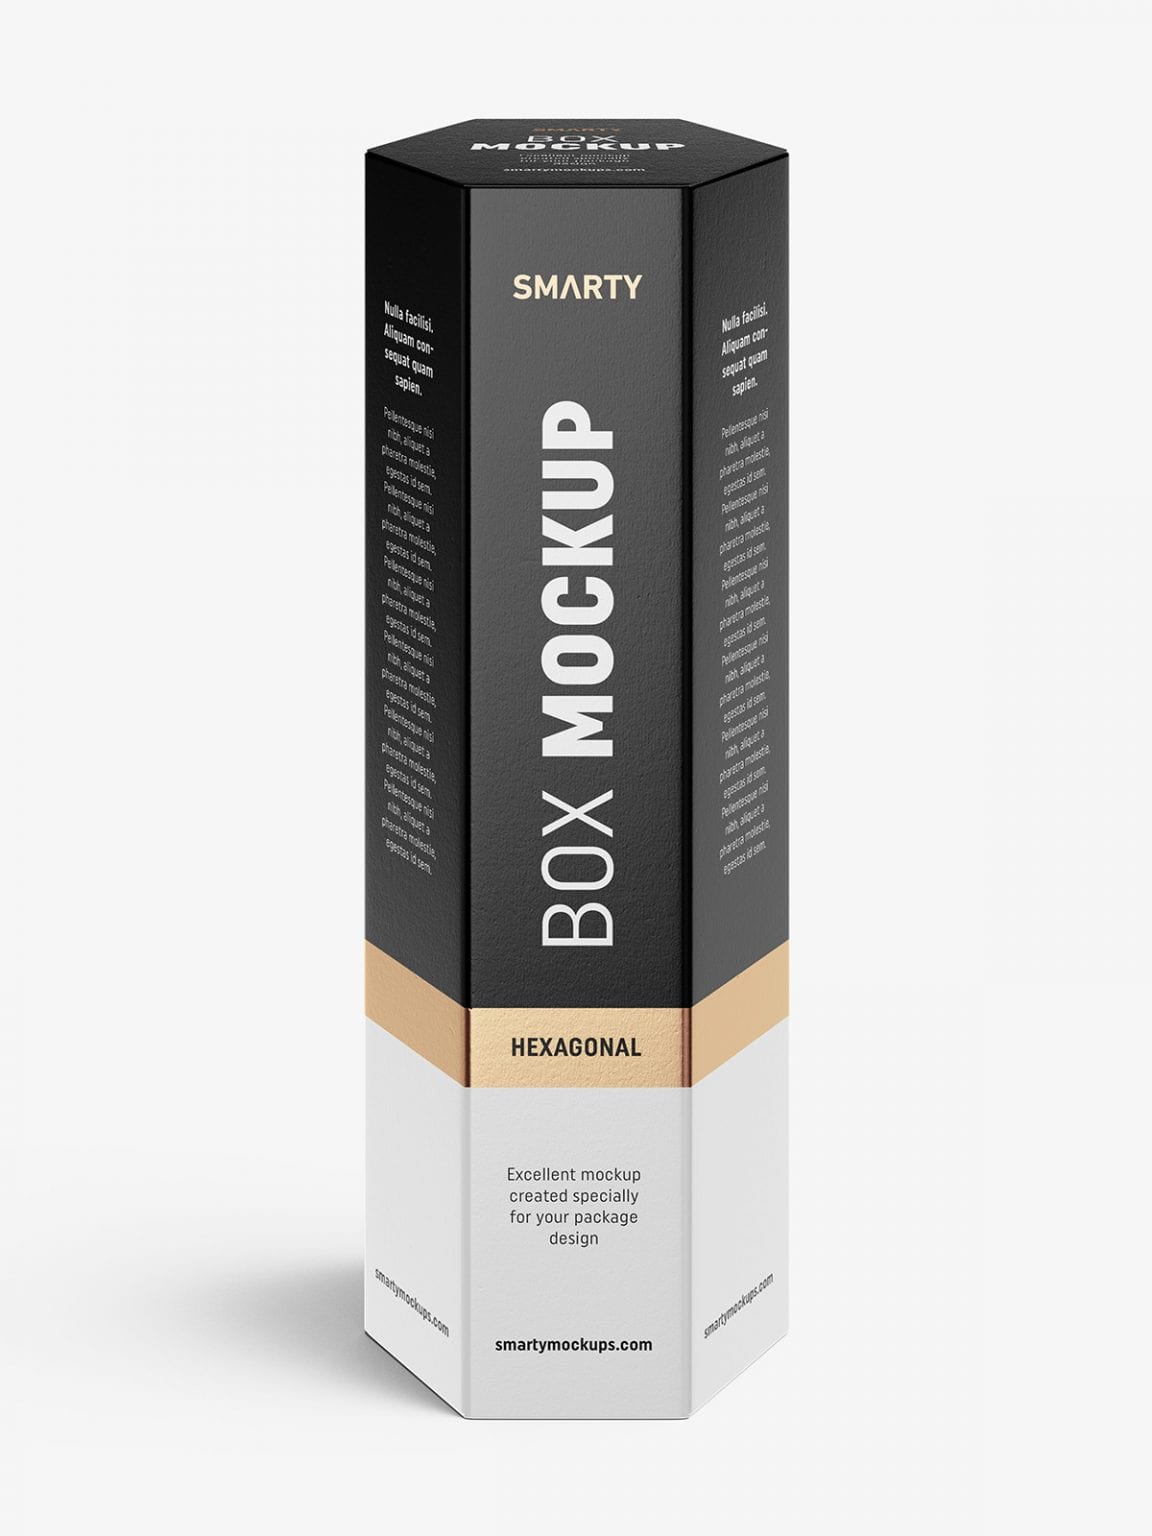 Download Products: Boxes - Page 2 of 4 - Smarty Mockups